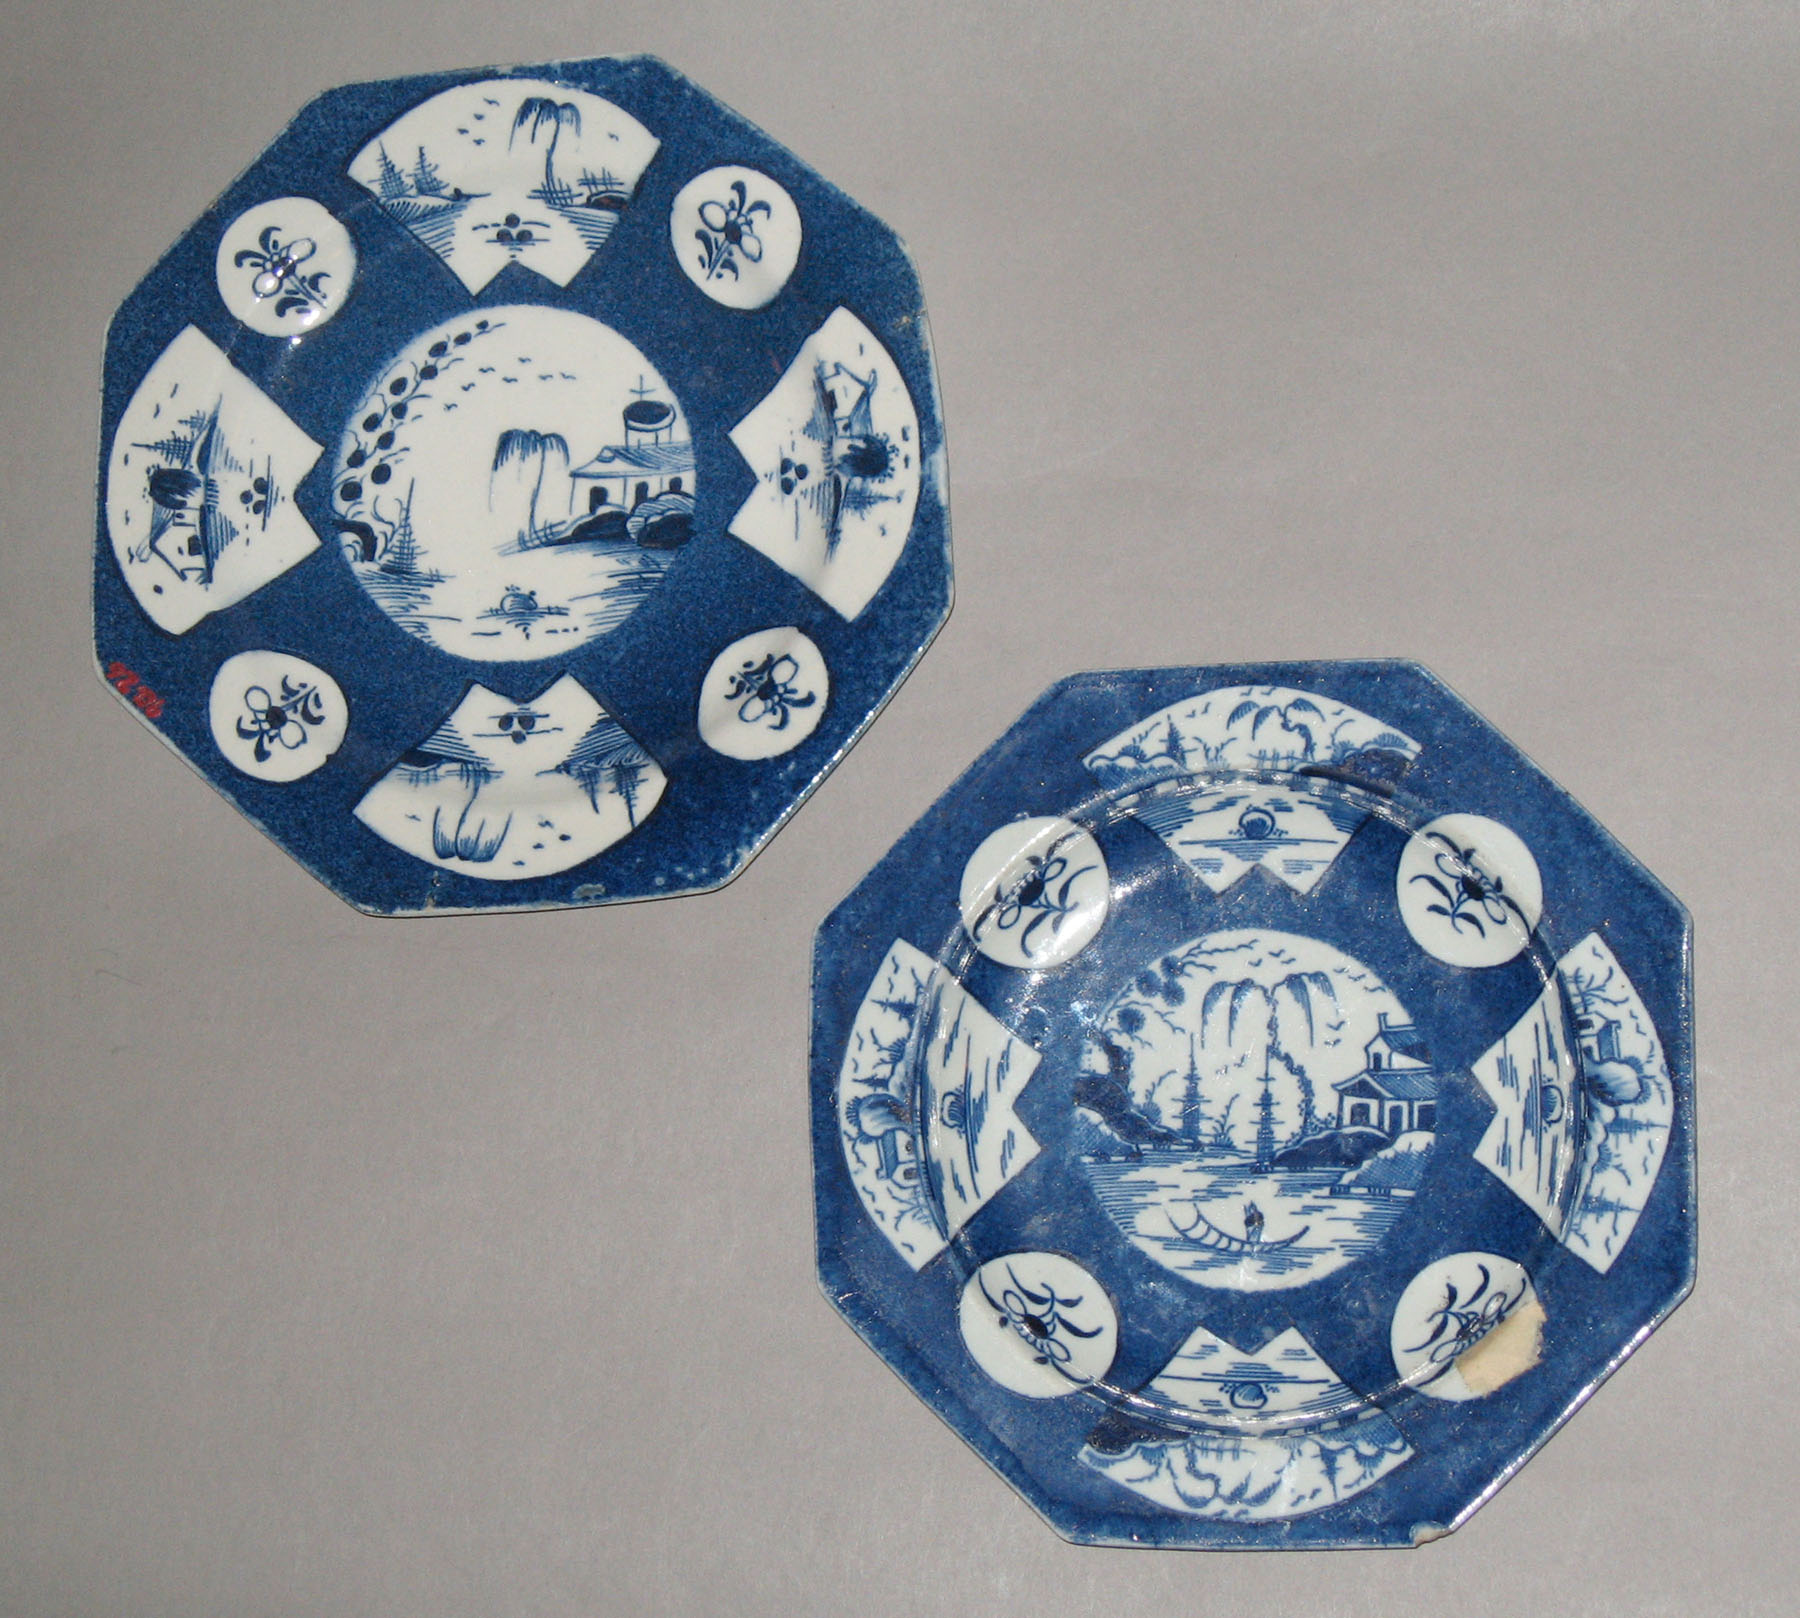 1990.0026, 2001.0003.026.003 Bow porcelain small plates